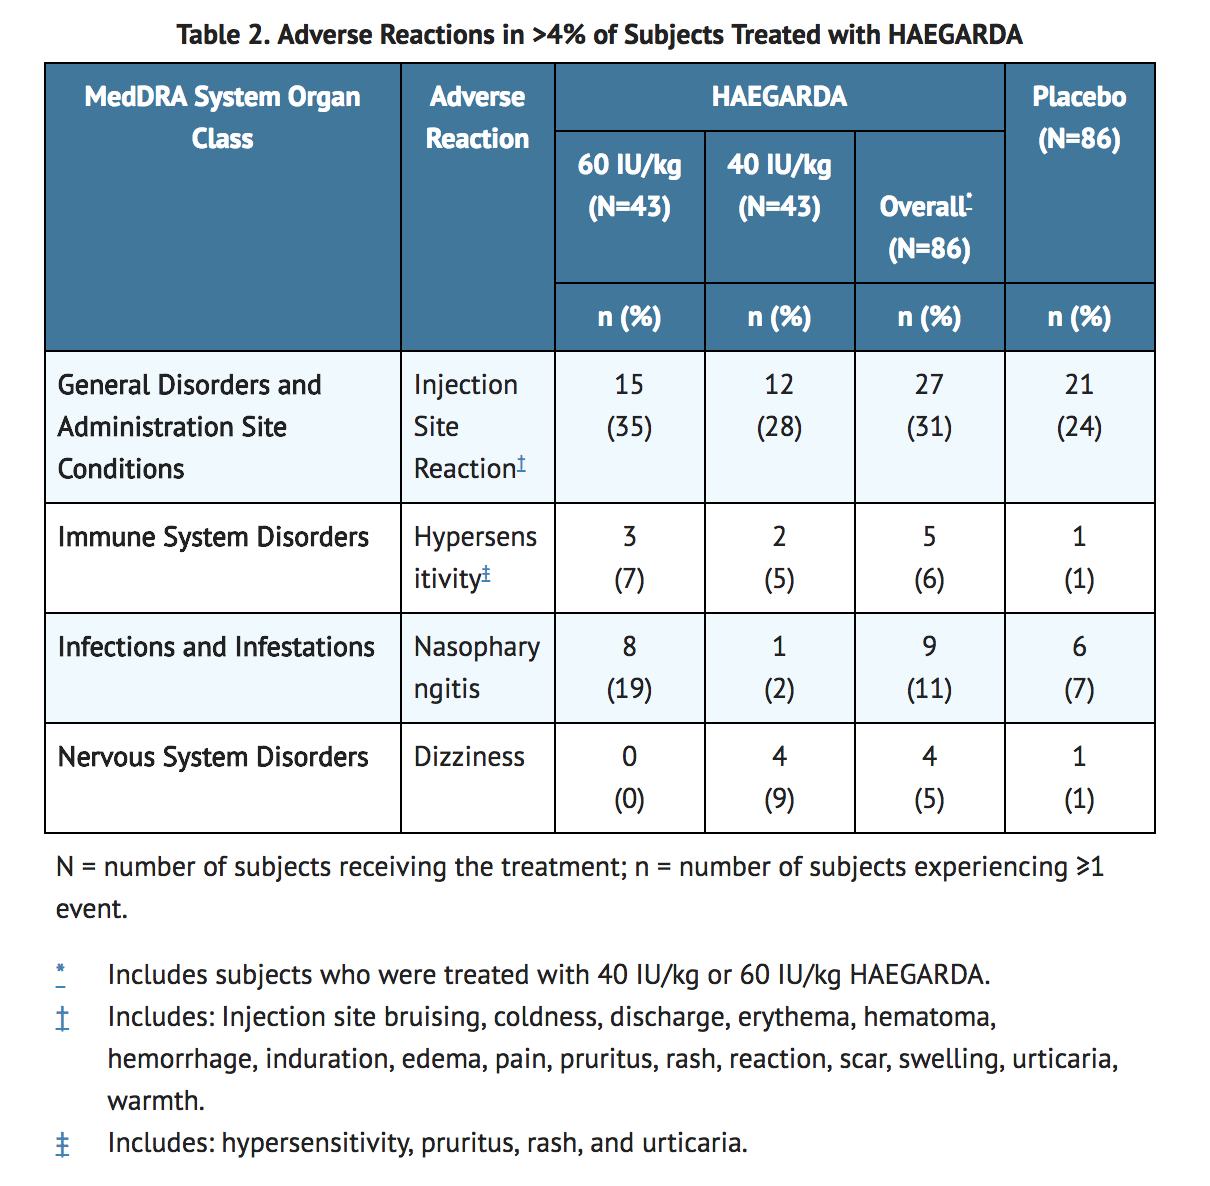 File:C1 esterase inhibitor subcutaneous Adverse Reactions Table.png